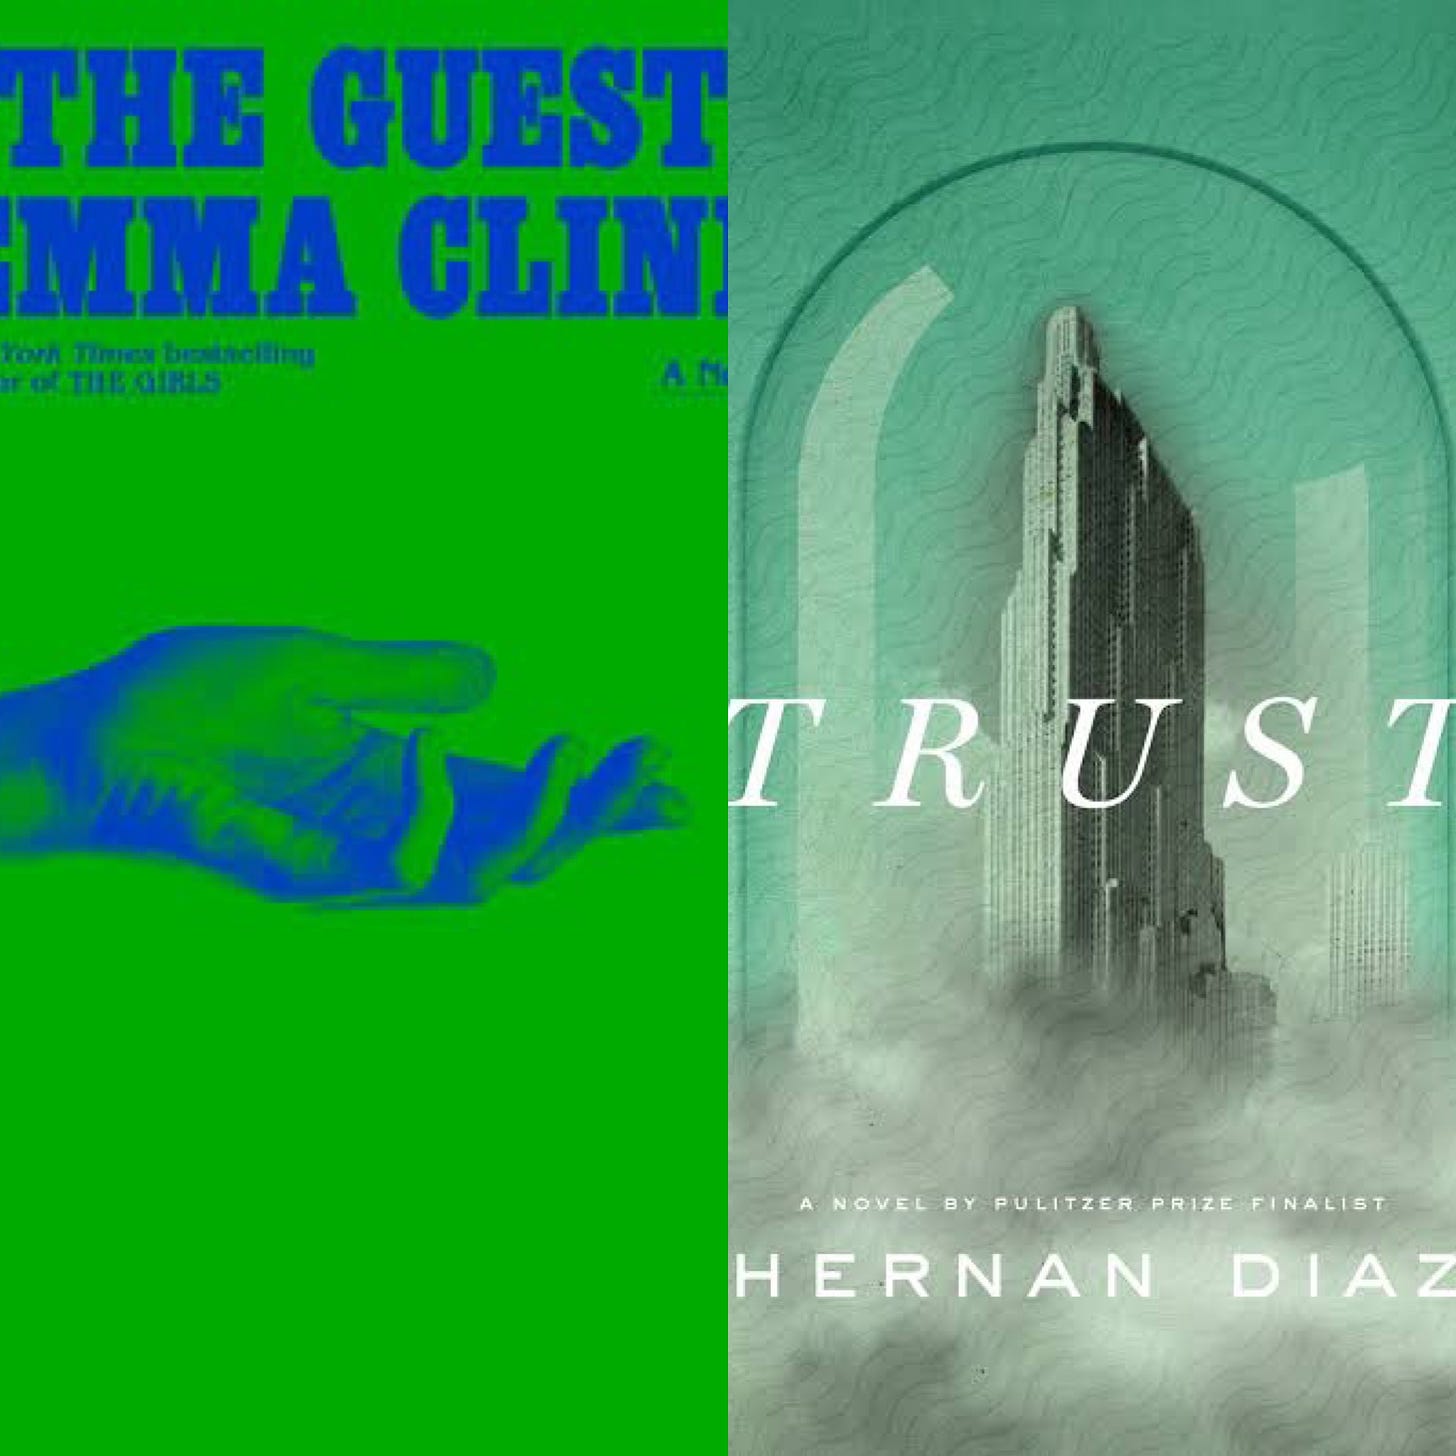 Two partial images of the book covers of The Guest and Trust side by side. The Guest cover is lime green with a blue picture of a hand being held out, and blue text of the title and author name. The Trust cover is tealish green, and features a picture of a skyscraper in a snow globe, with the word Trust in white text over the top, and smoke or fog obscuring the base of the skyscraper.